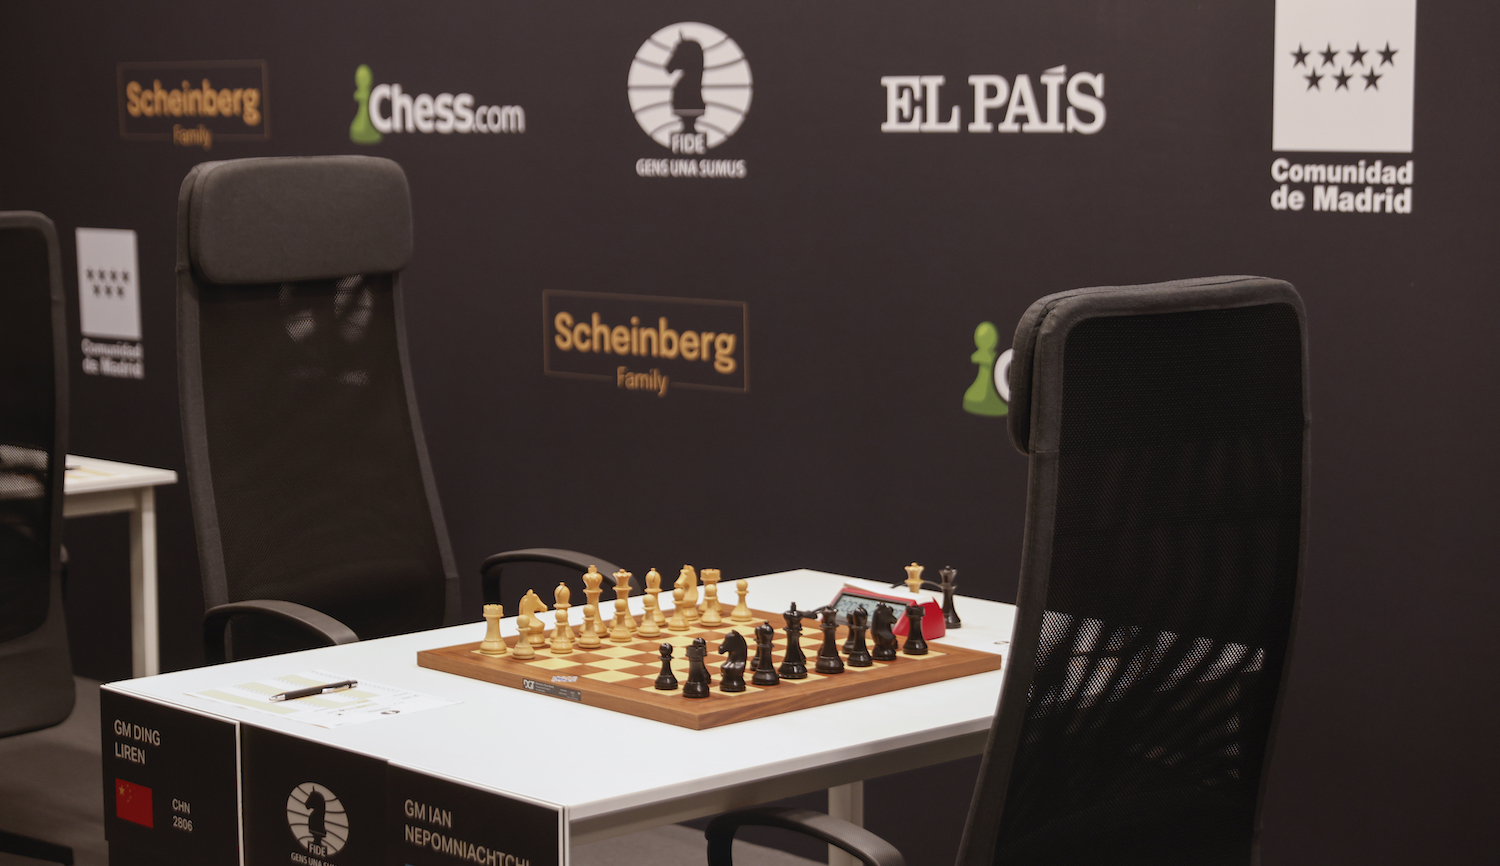 The table with the chess board appears ready for the game between Ding Liren and Ian Nepomniachtchi on the first day of competition at the FIDE Candidates Chess Tournament on June 17, 2022 in Madrid, Spain. (Miguel Pereira/Getty Images)